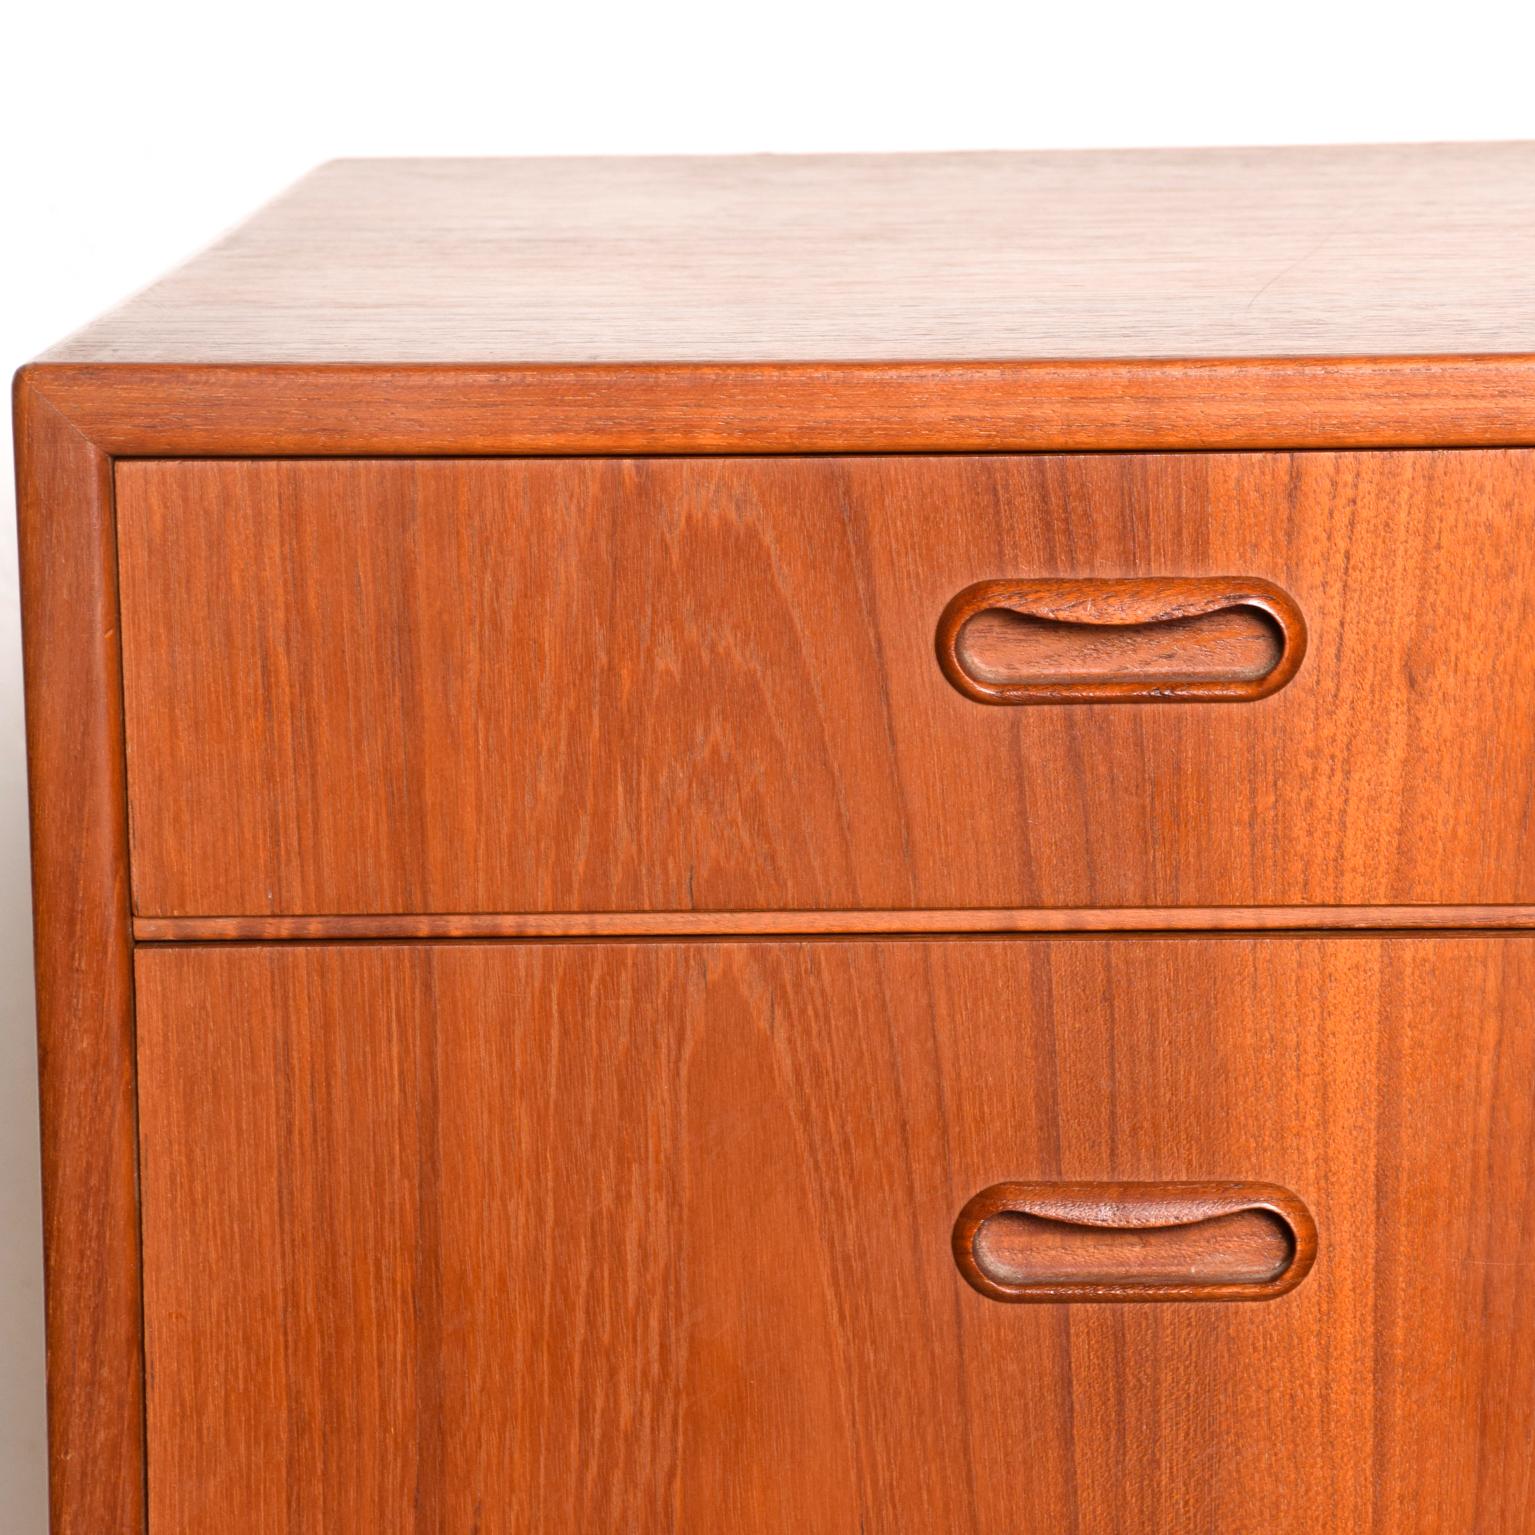 For your consideration: Highboy Dresser-chest of drawers made in Denmark by FALSTER.
Constructed with teak wood. All drawers are constructed with double dovetail joints and  open-close with ease.
Stamped with FALSTER label in the top drawer. 
The